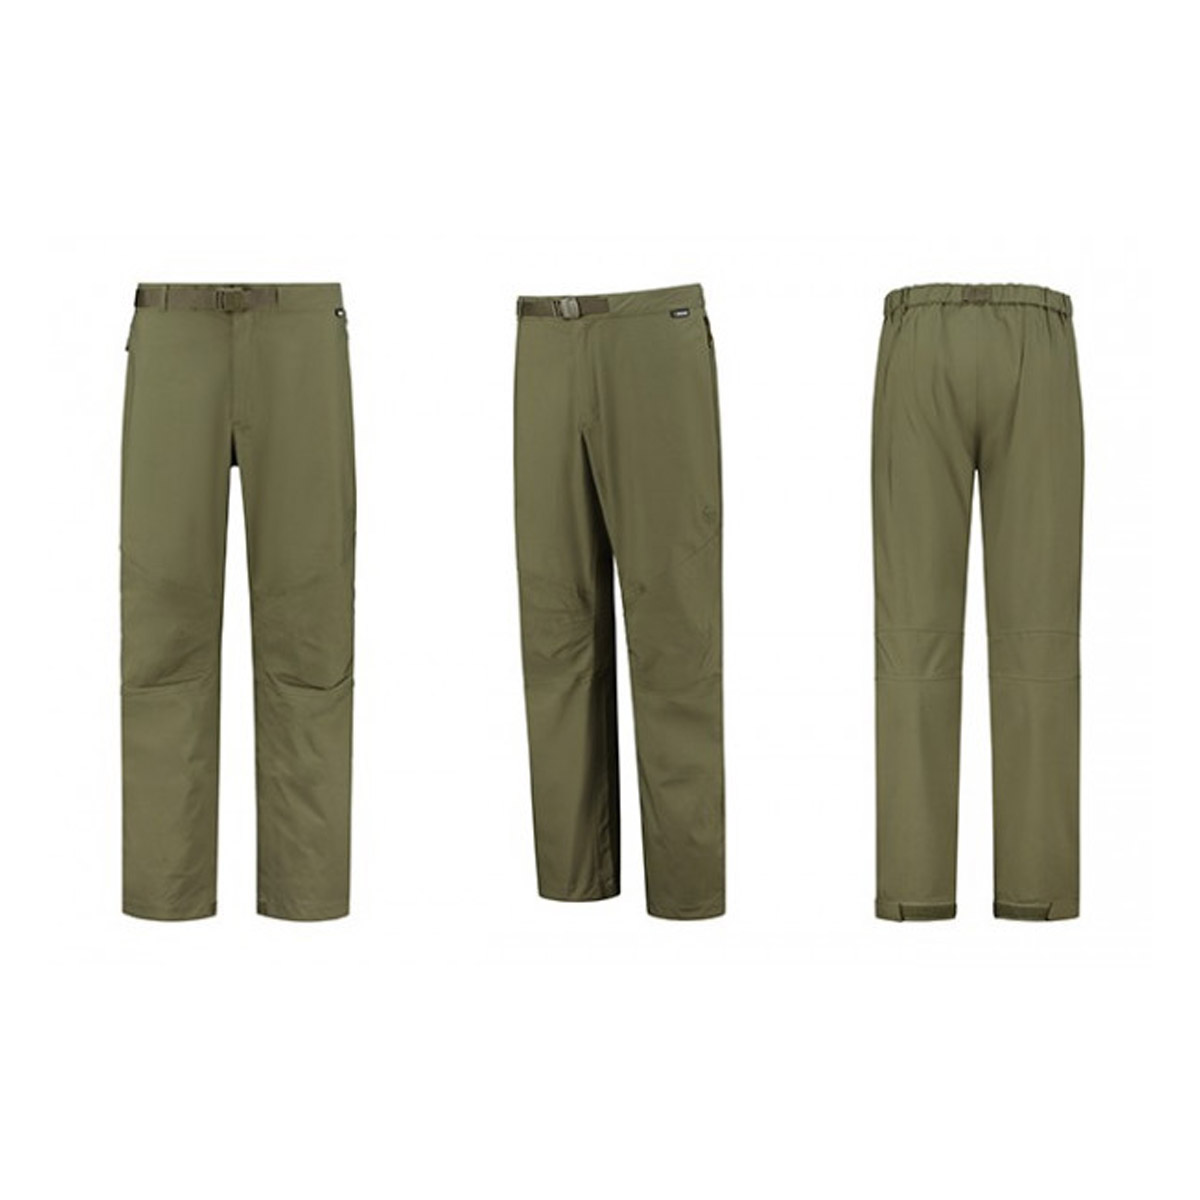 Korda Kore Drykore Over Trousers Olive 